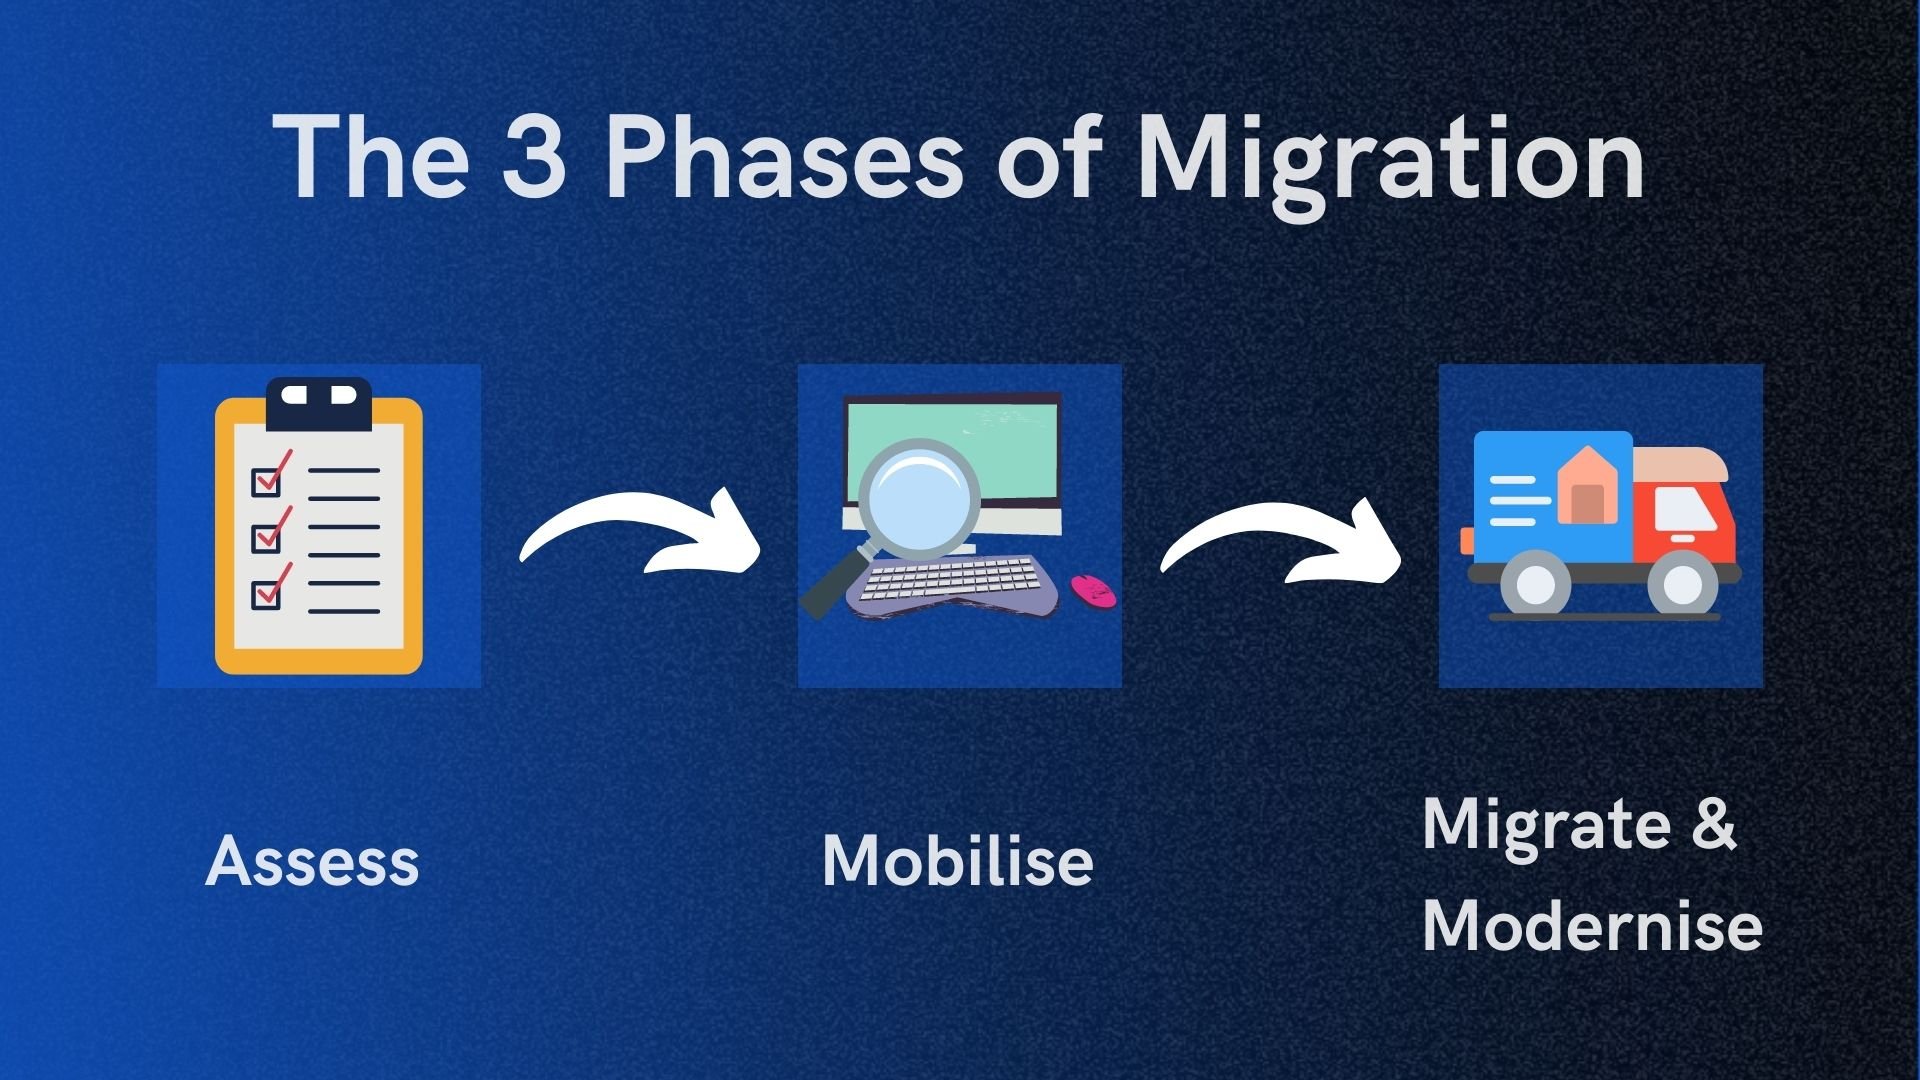 the 3 phases of migration graphic, showing assess, mobilise and migrate and modernise